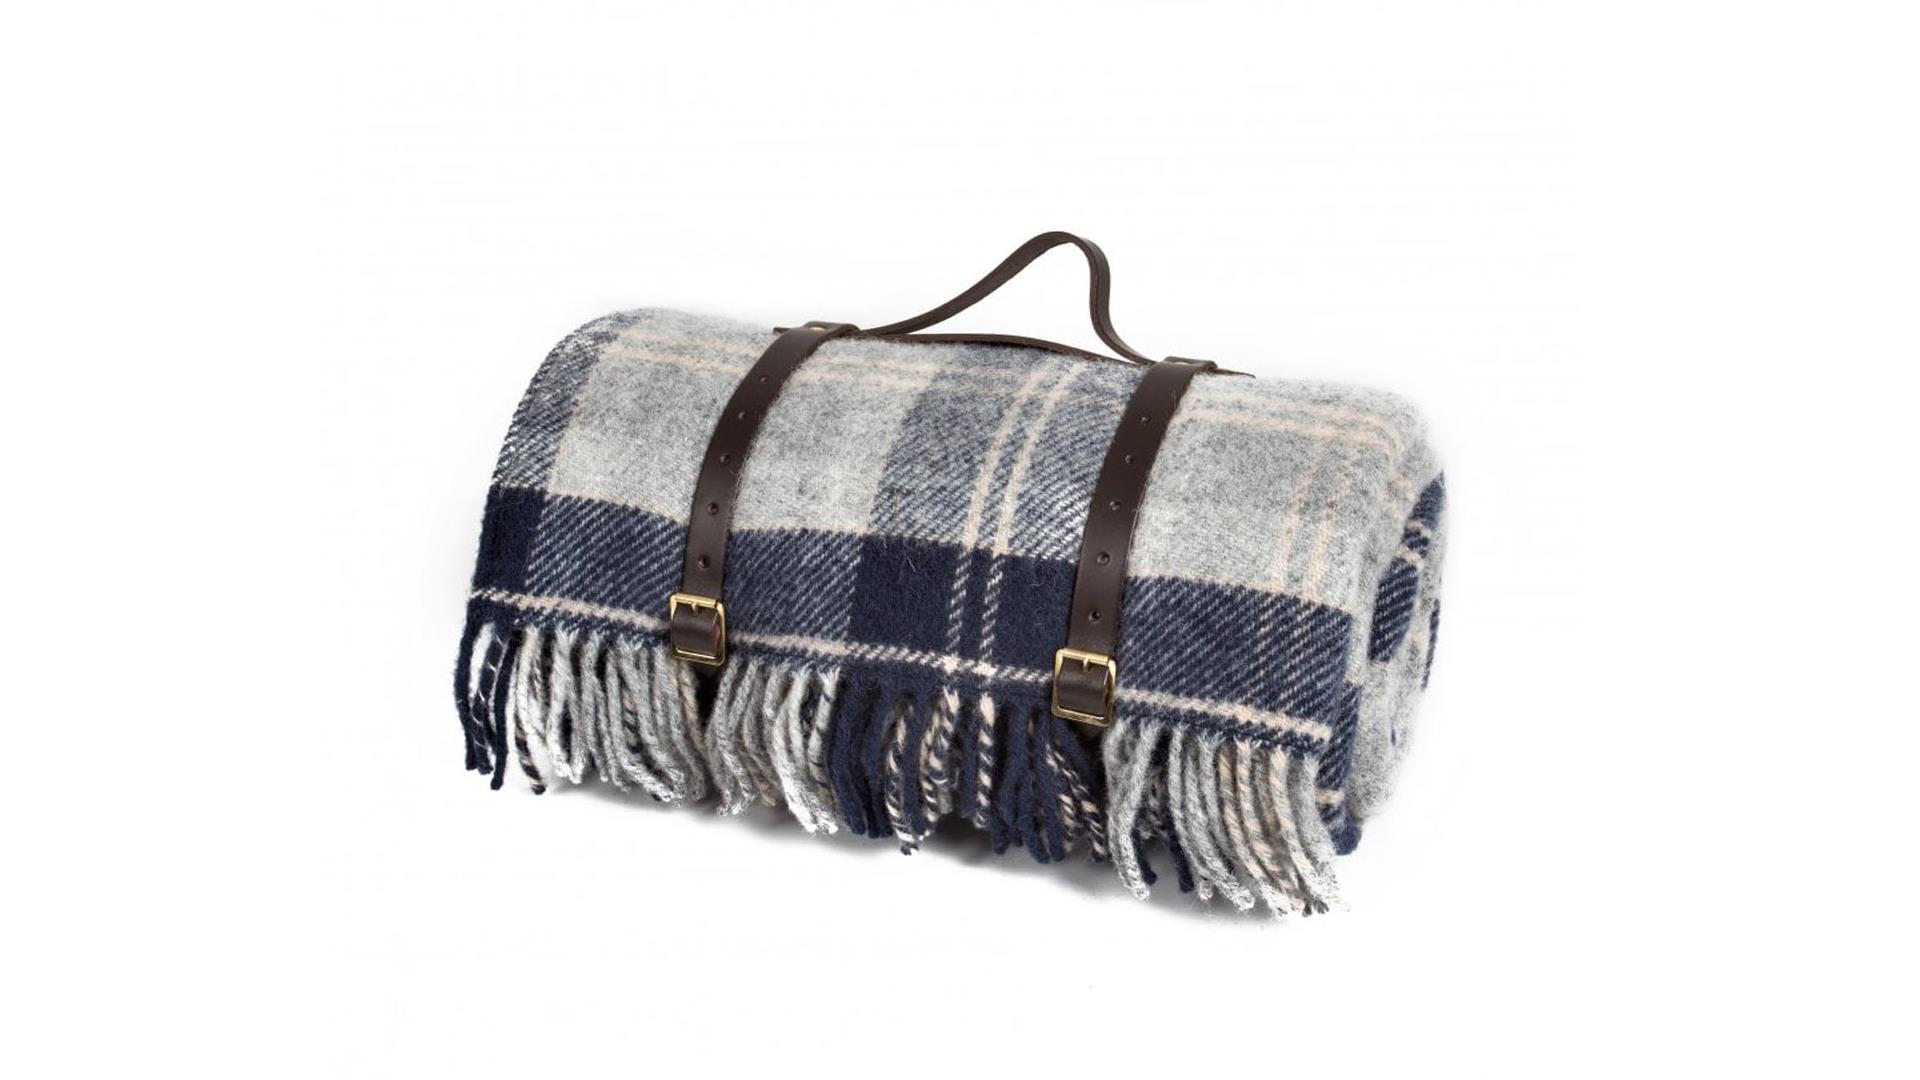 Polo Picnic Rug with leather Carry Handle Strap from Tweedmill in